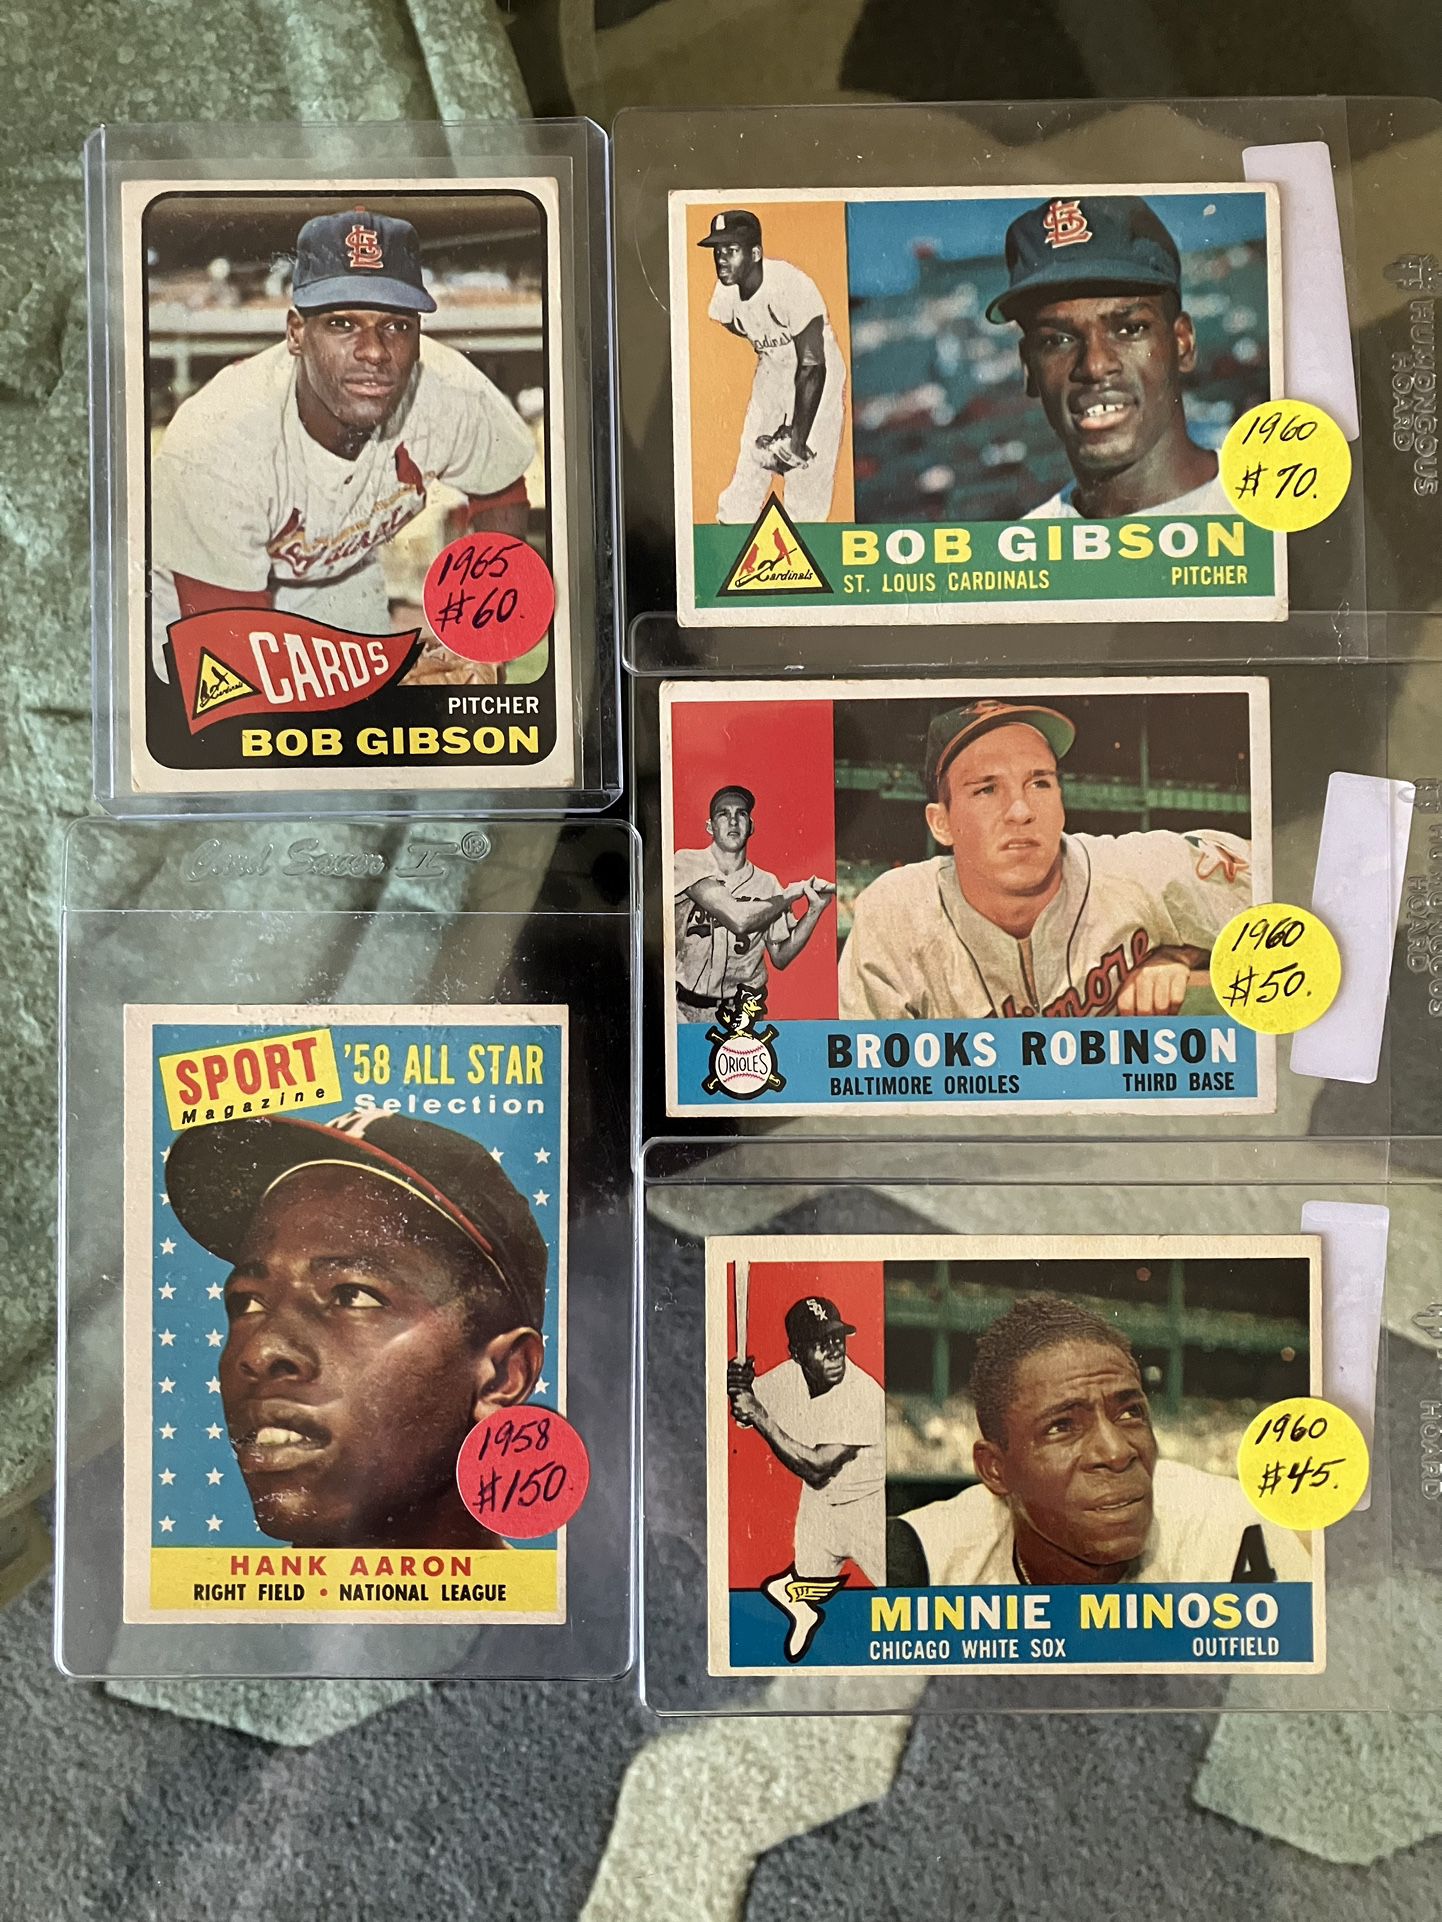 🥎  VINTAGE BASEBALL CARD COLLECTION * (1953 To 1973) * 500 + CARDS  🥎